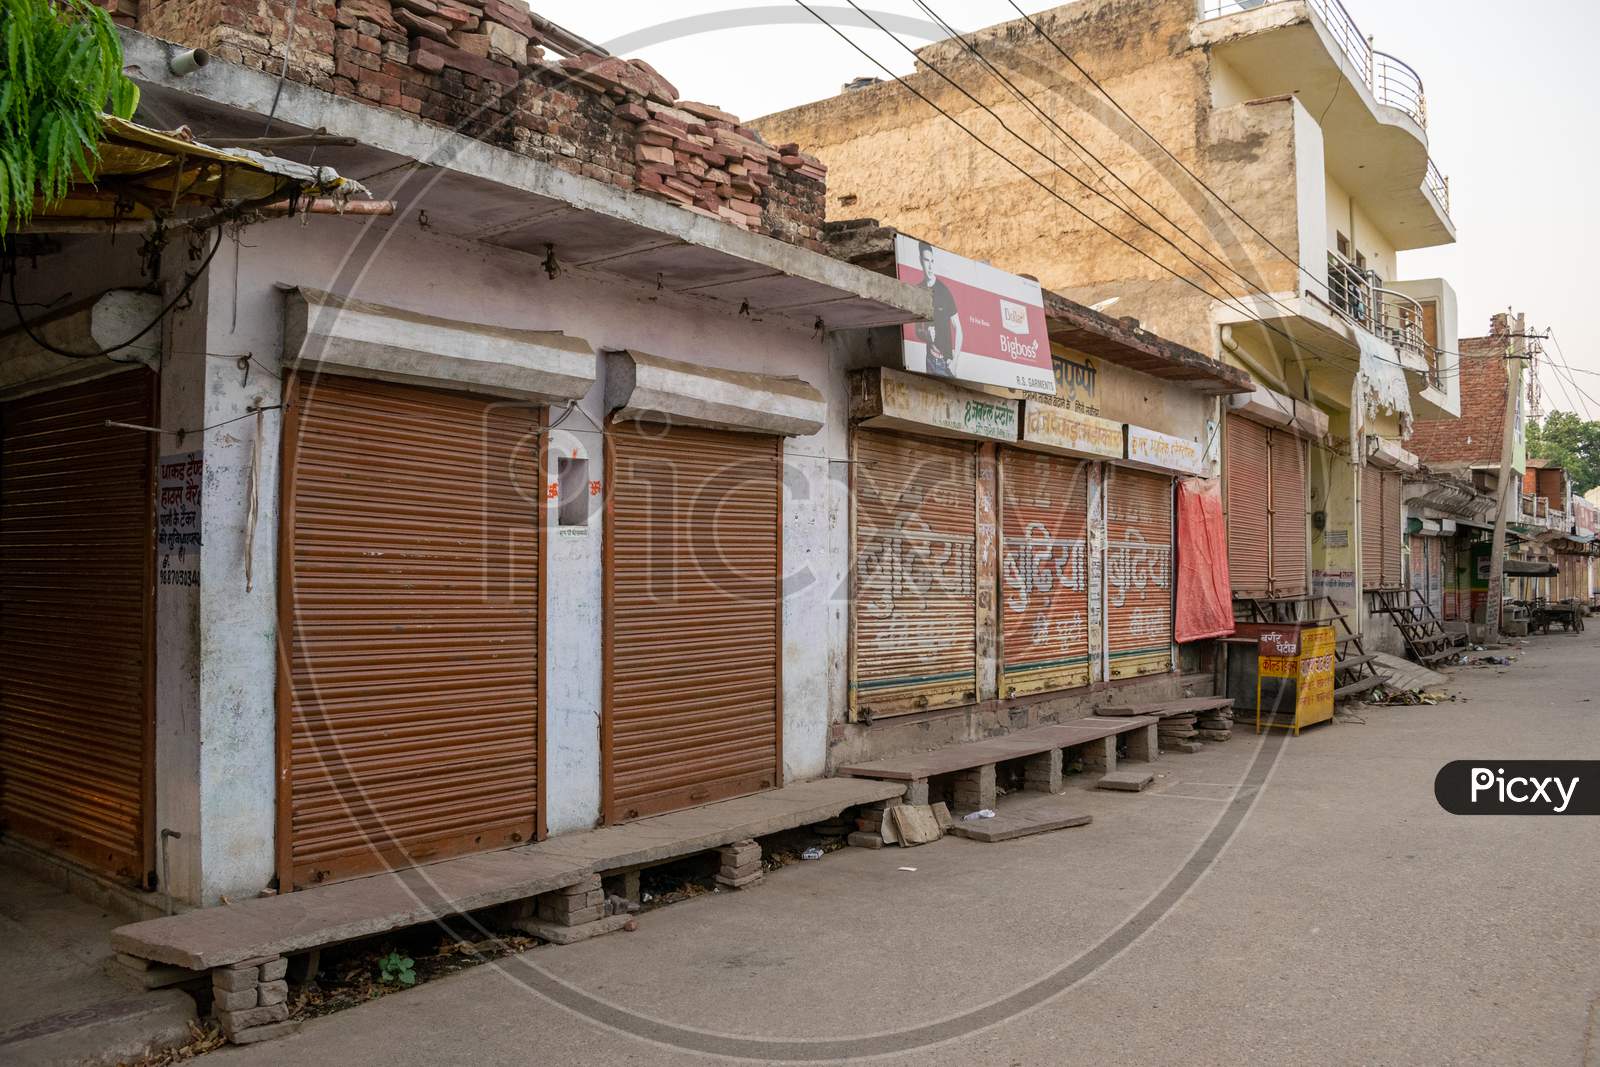 Shops at a Market closed due to the nationwide lockdown amid coronavirus or covid 19 outbreak in India